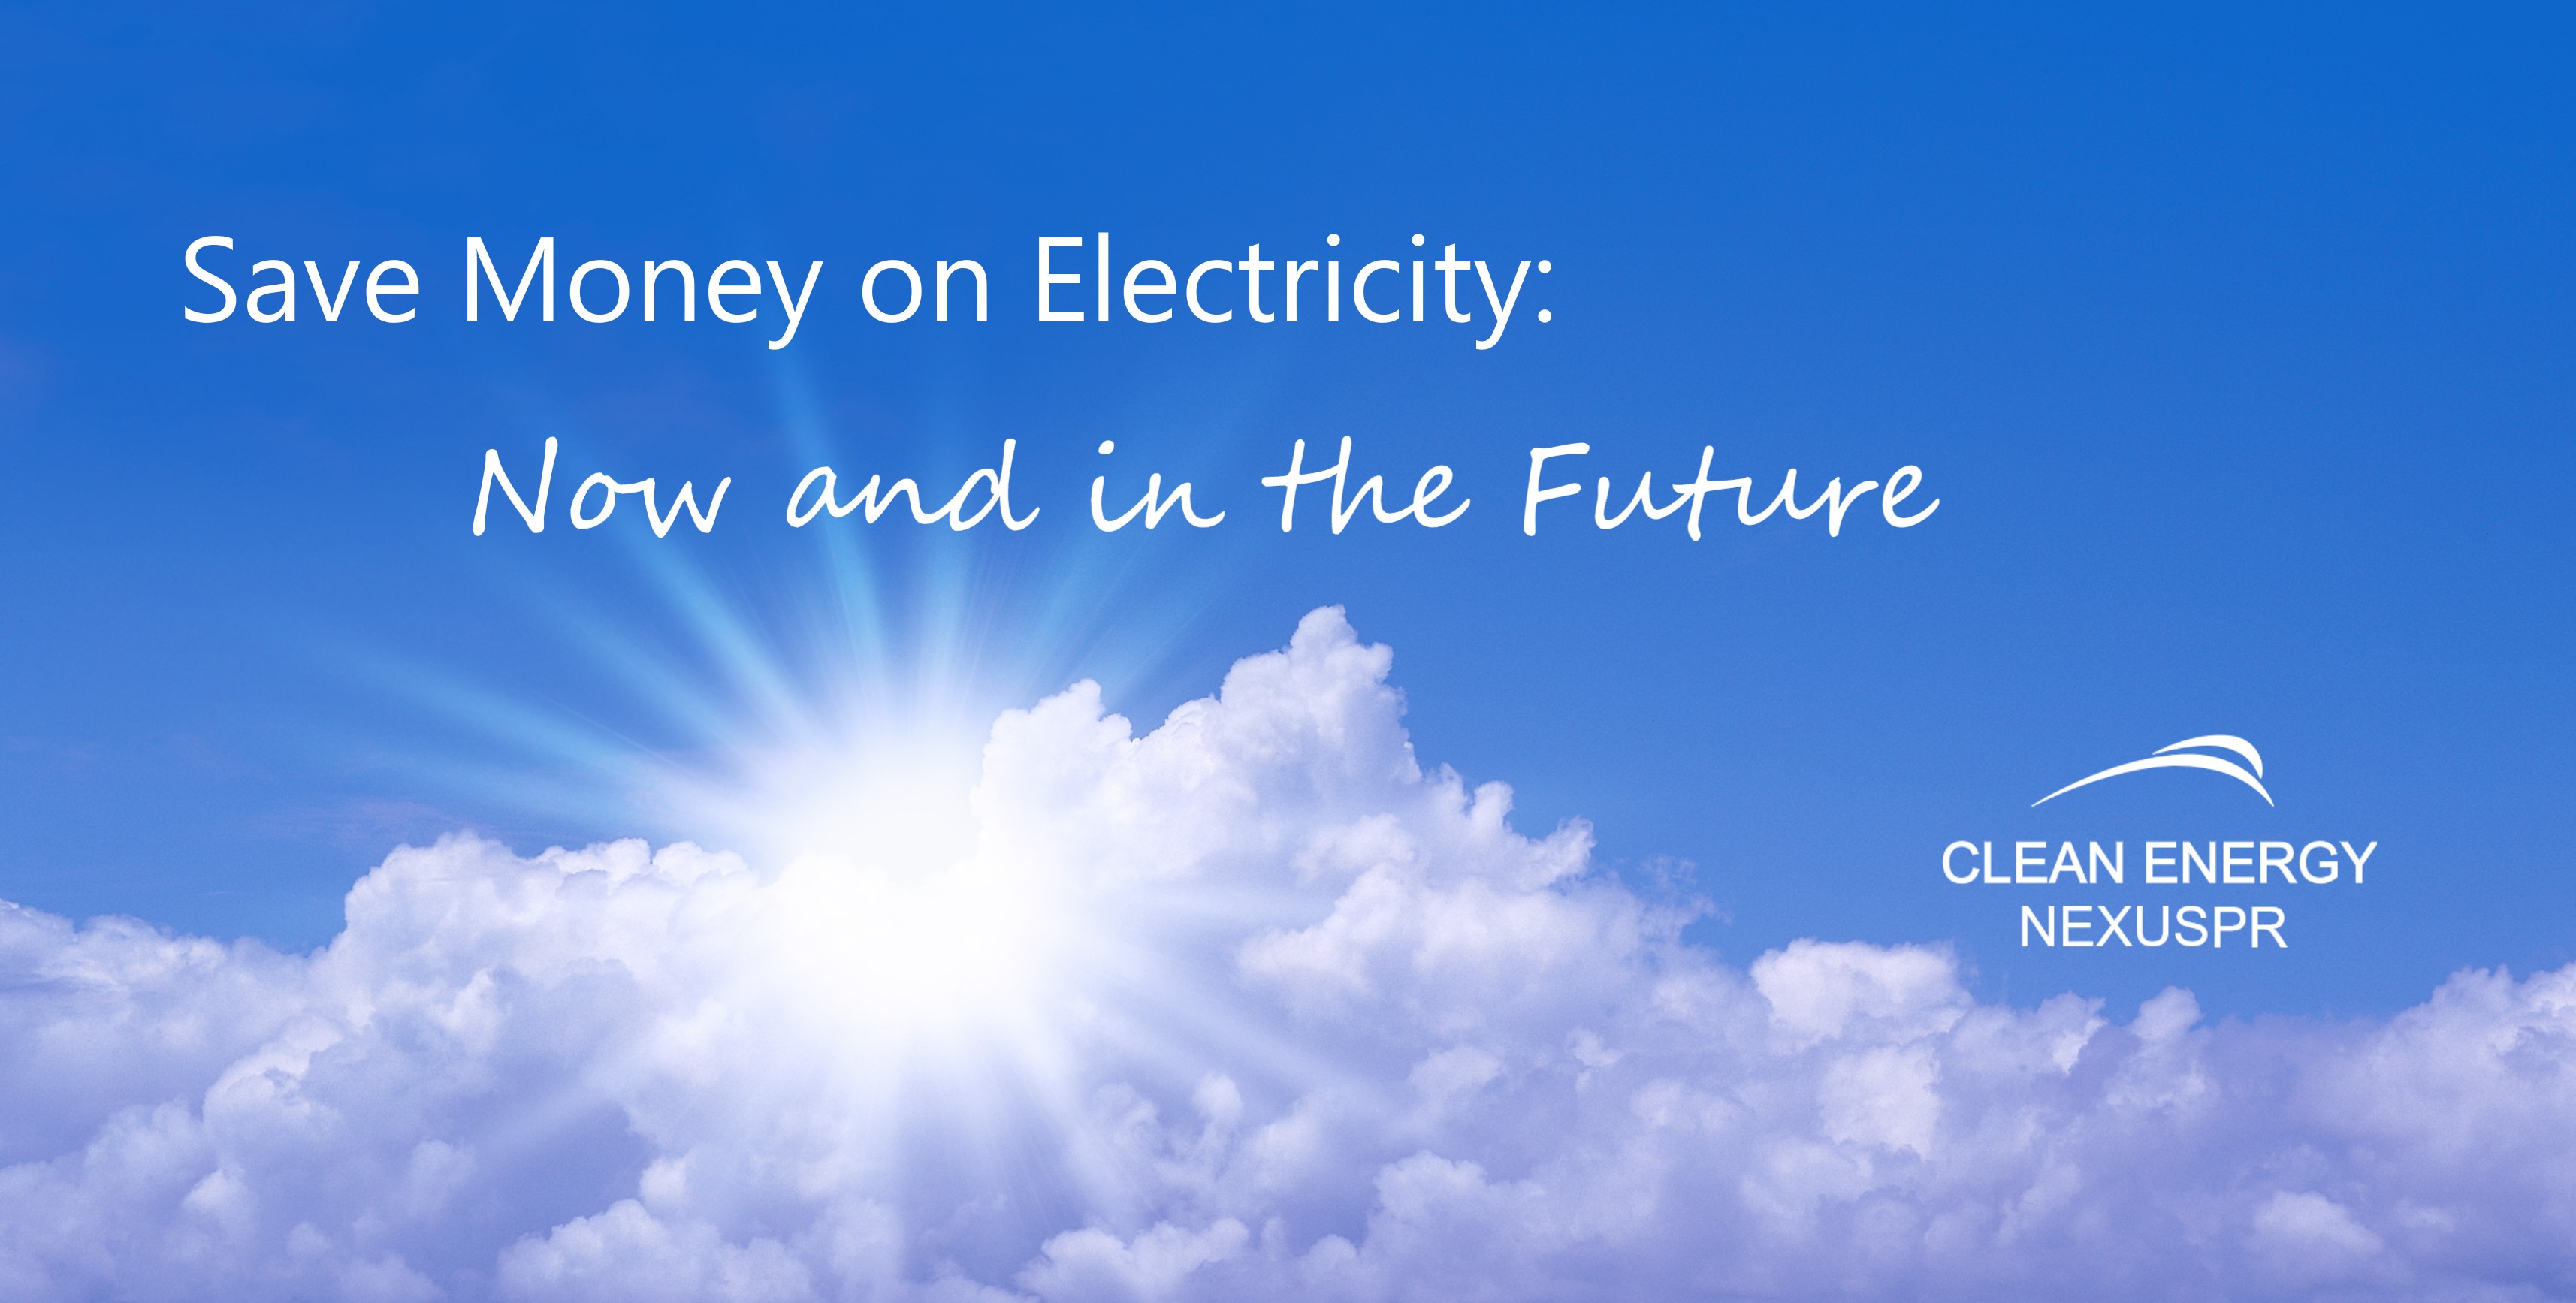 Save Money on Electricity Now and in the Future